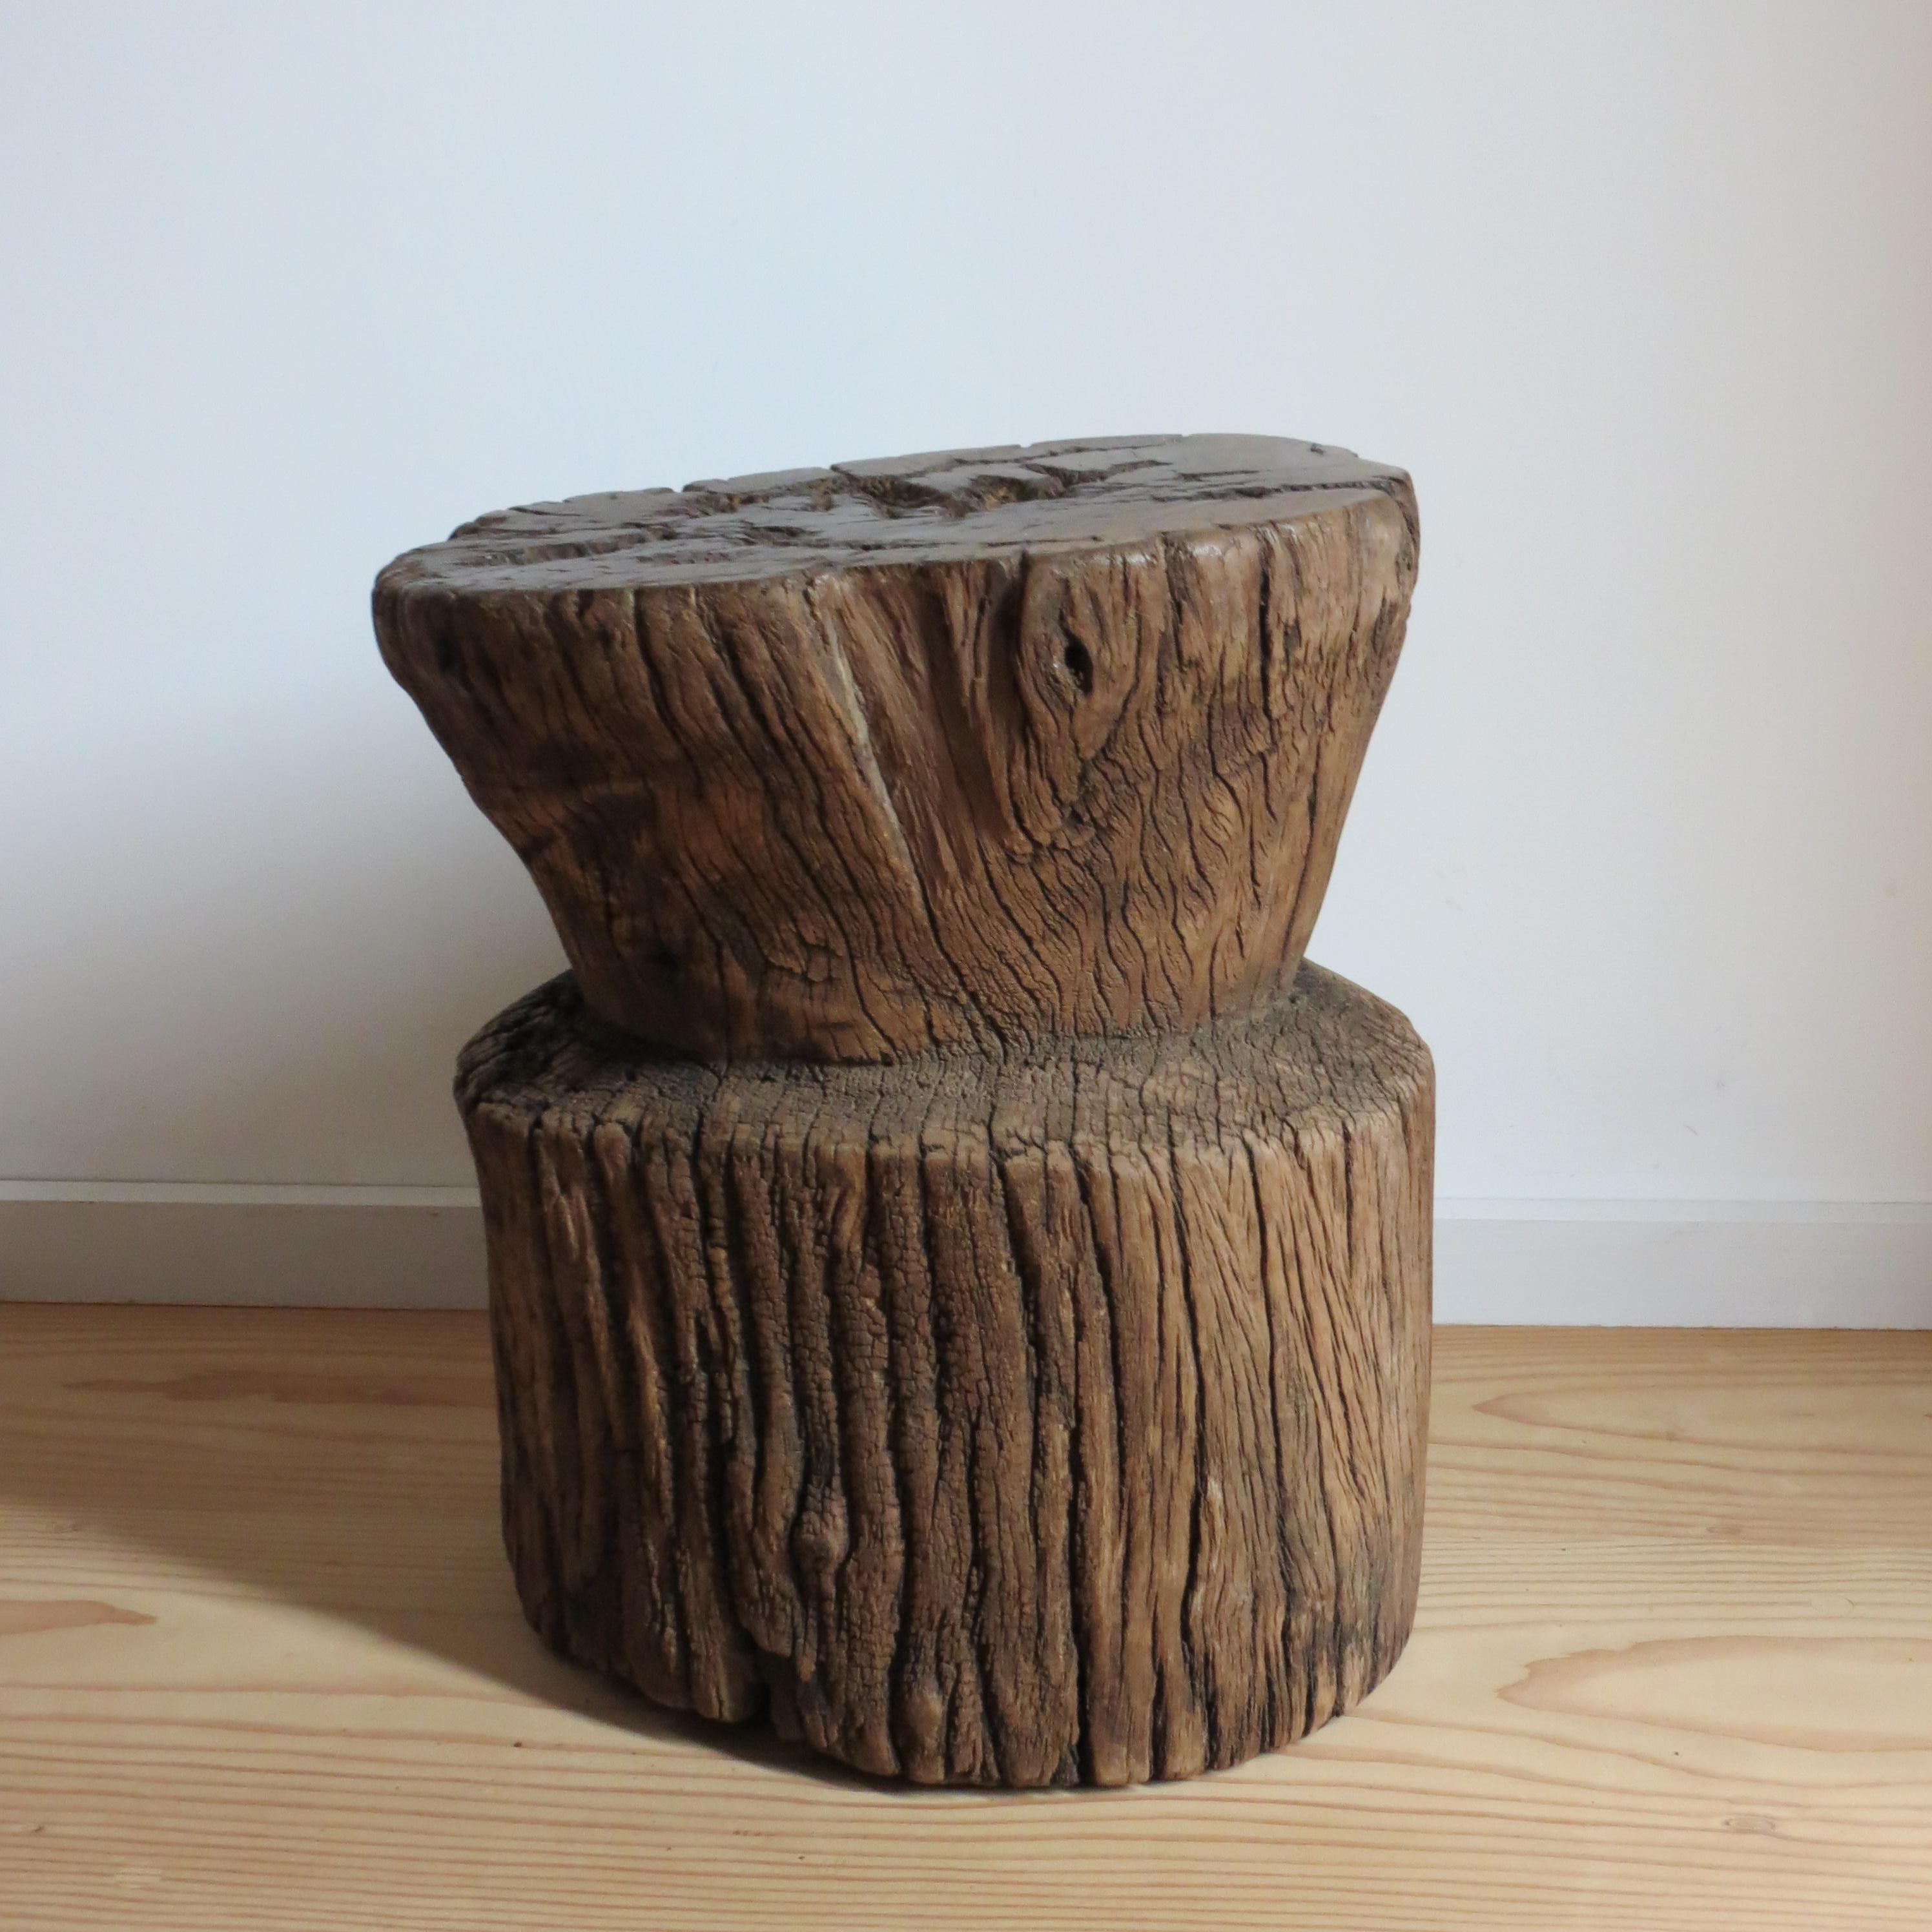 A wonderful primitive rustic wooden mortar stool or table. 
Made from hardwood, this piece has been hand crafted.
The piece is very versatile and can be used as a small table or stool or turned up the other way and used as a plant holder or as a